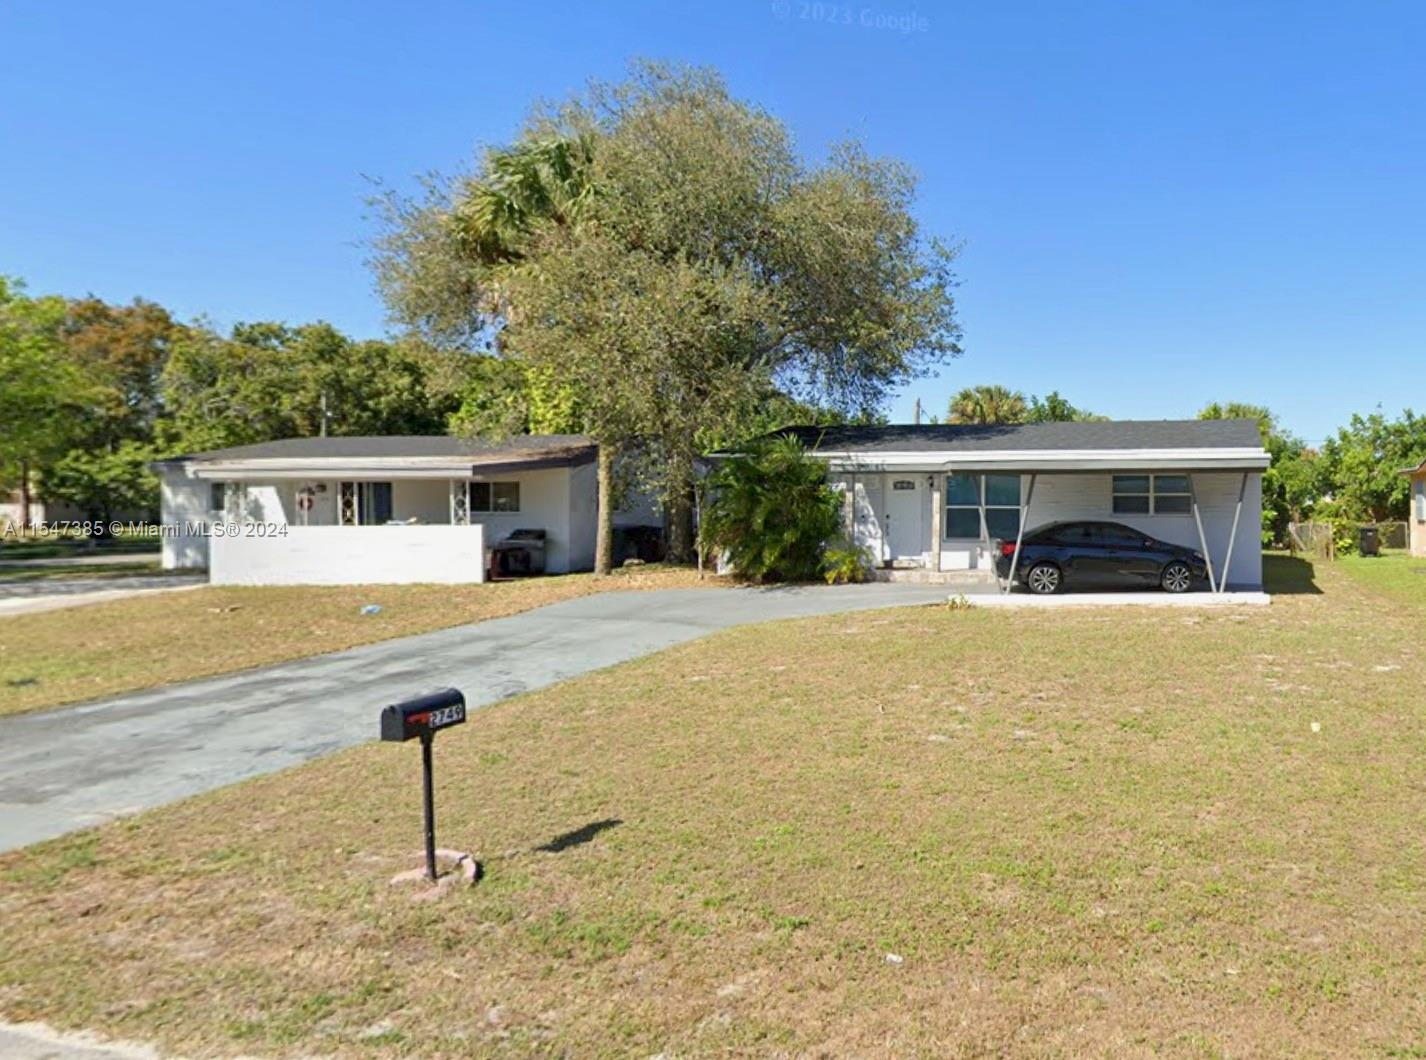 Address Not Disclosed, Fort Lauderdale, Broward County, Florida - 3 Bedrooms  
2 Bathrooms - 